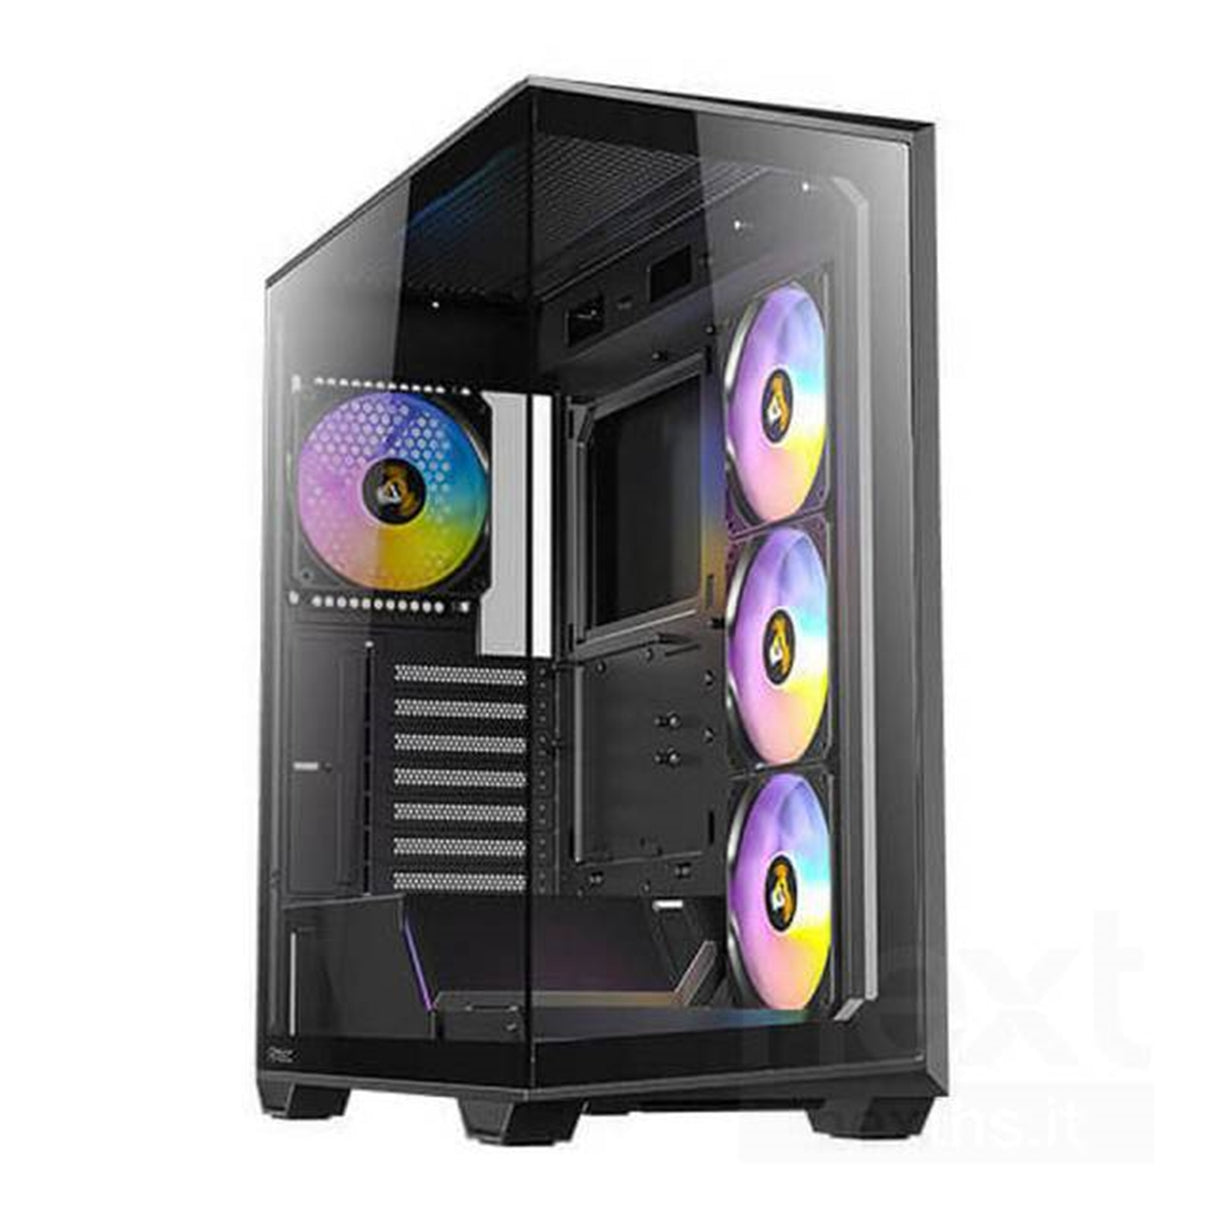 ANTEC Constellation C3 Black ARGB Case, 270' Full-view tempered glass, Dual Chamber, Tool-Free Design, 4 x ARGB PWM fans with built-in fan controller, ATX, Micro-ATX, ITX